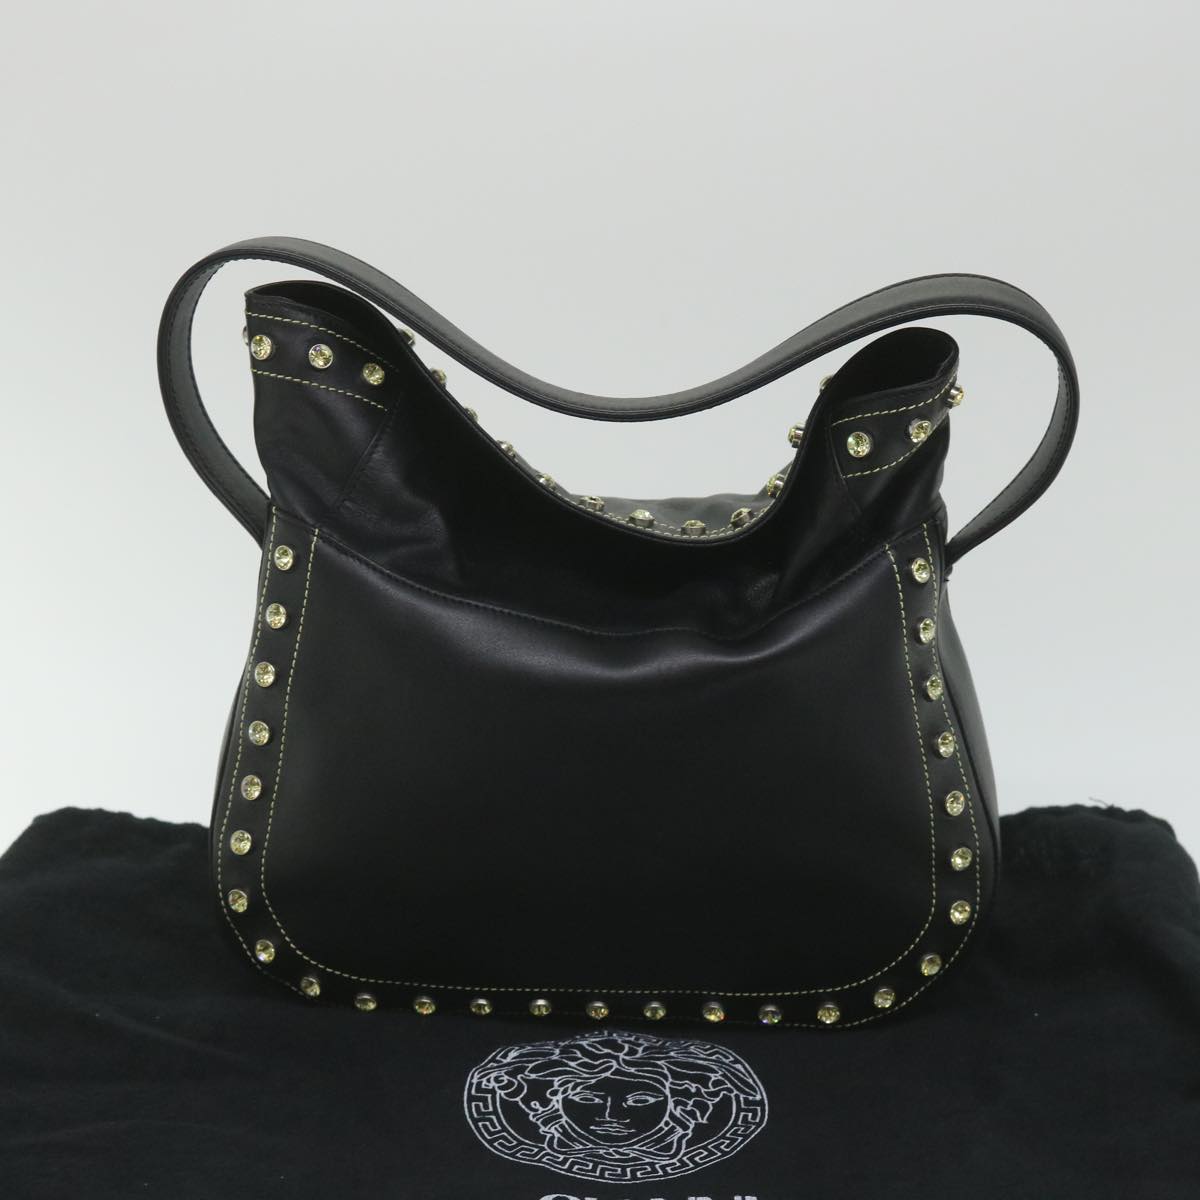 Gianni Versace Shoulder Bag Leather Black Yellow Auth Bs9527